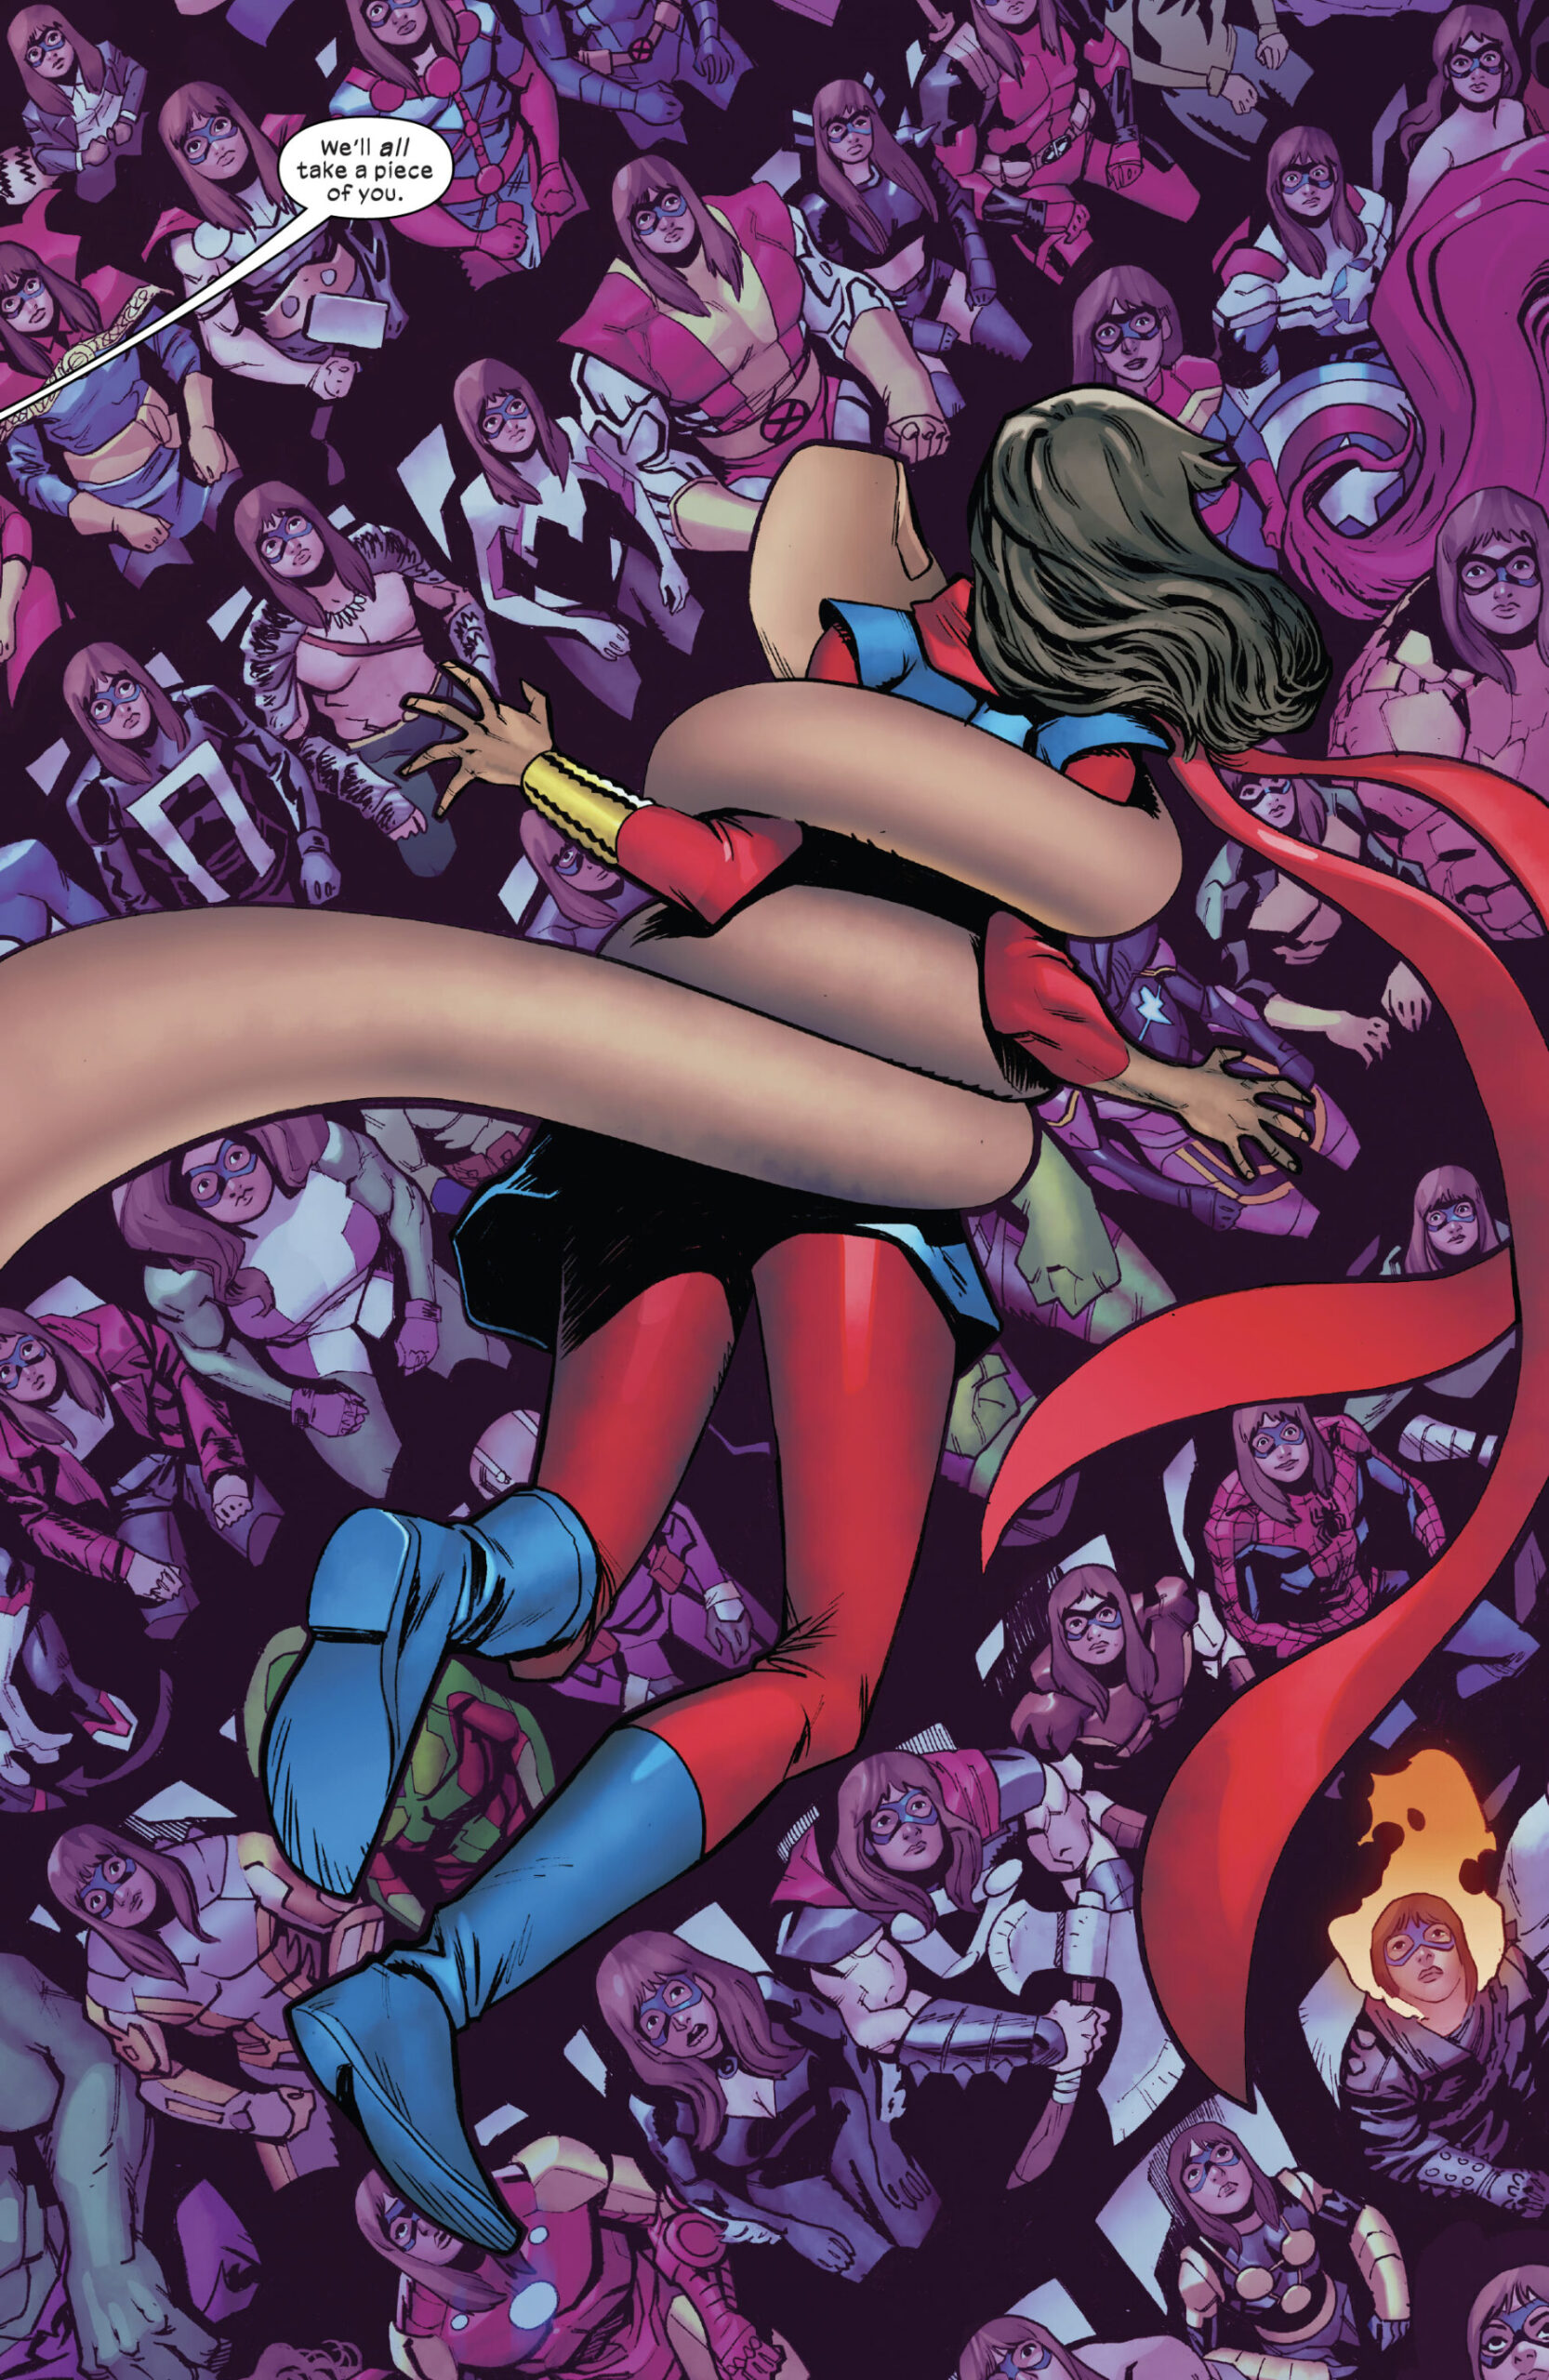 Kamala Khan is unsure of her own identity in Ms. Marvel: The New Mutant Vol. 1 #1 "The New Normal" (2023), Marvel Comics. Words by Iman Vellani and Sabir Pirzada, art by Carlos Gómez, Adam Gorham, Erick Arciniega, and Joe Caramagna.